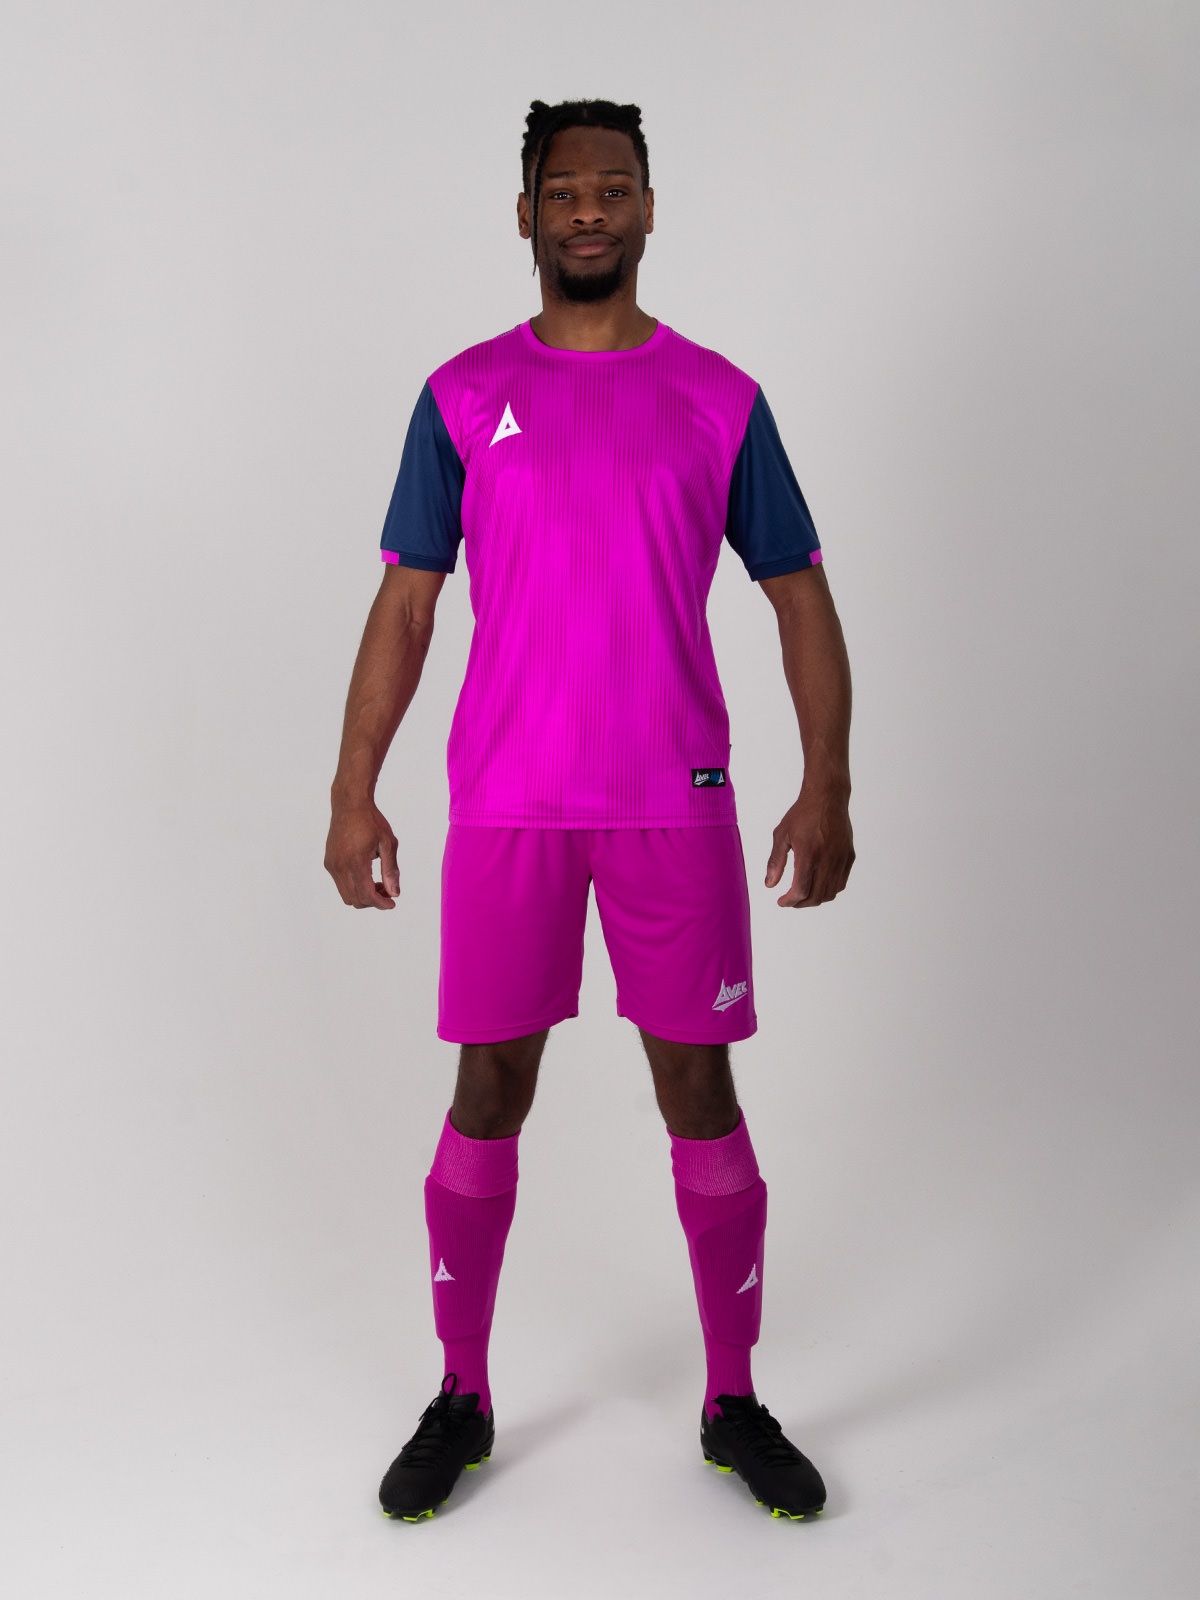 a full purple football kit with navy sleeves.